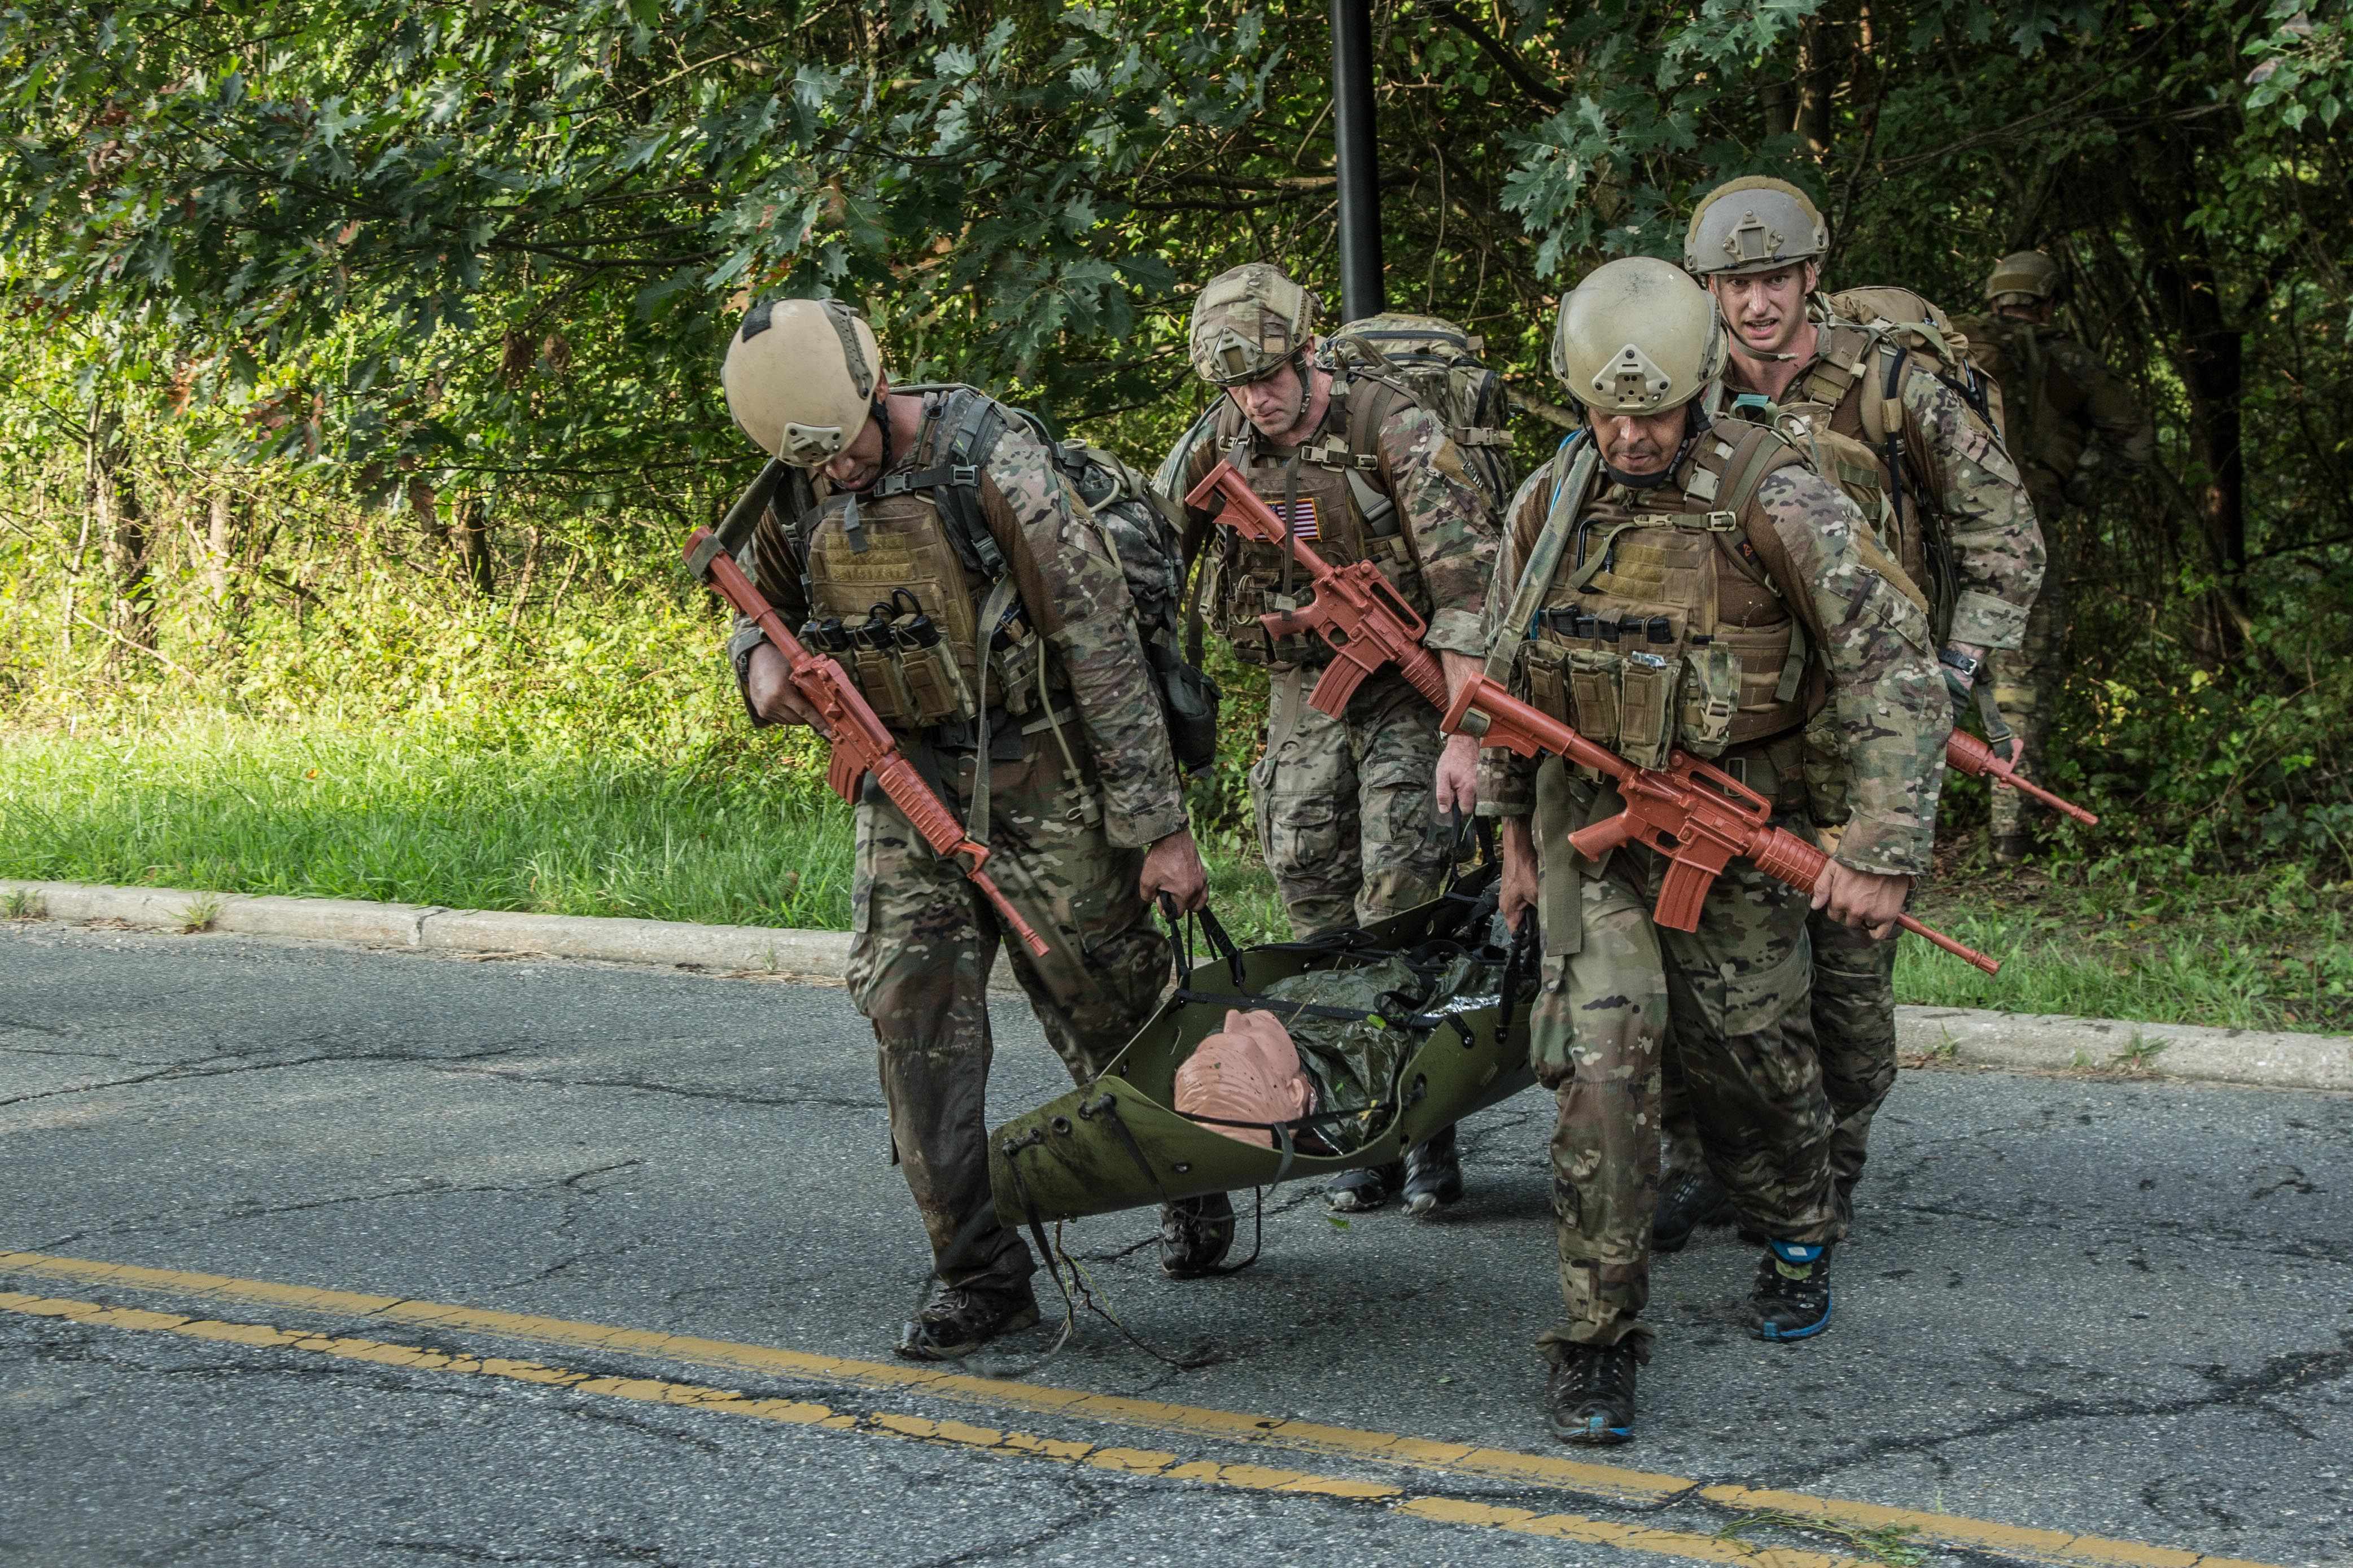 What You Need to Attend an American Milsim Event 